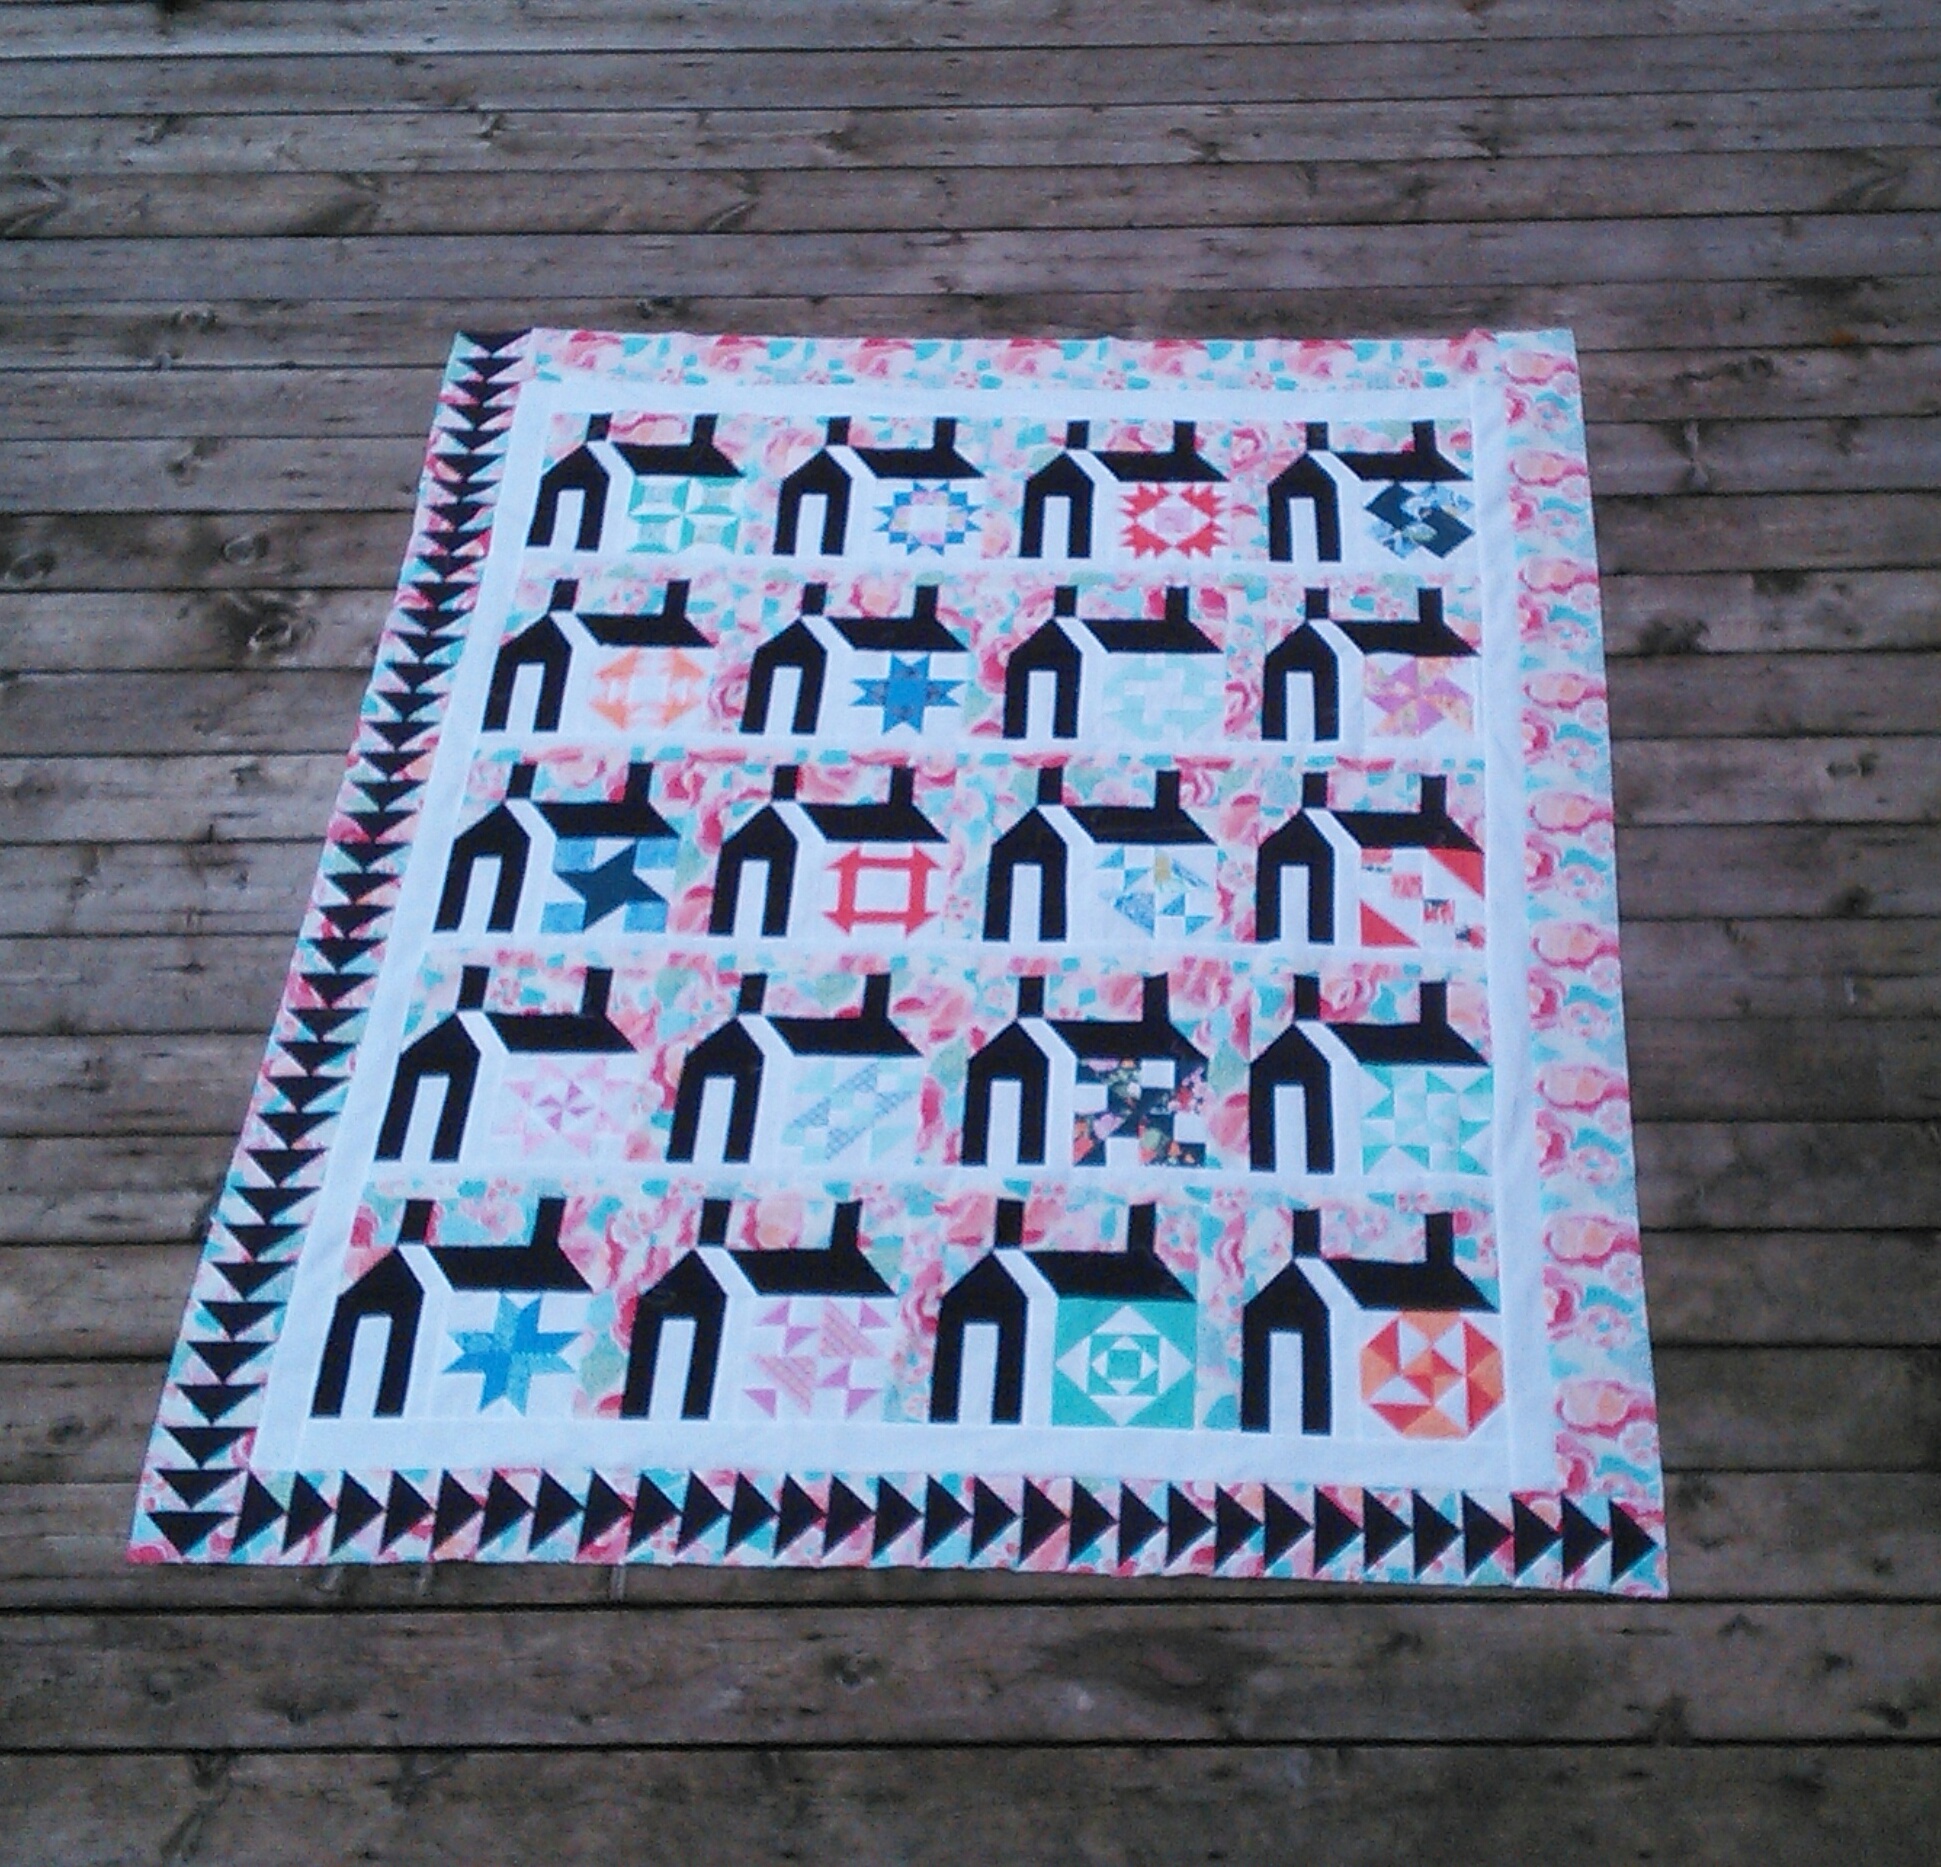 Just Takes 2 Schoolhouse Quilt